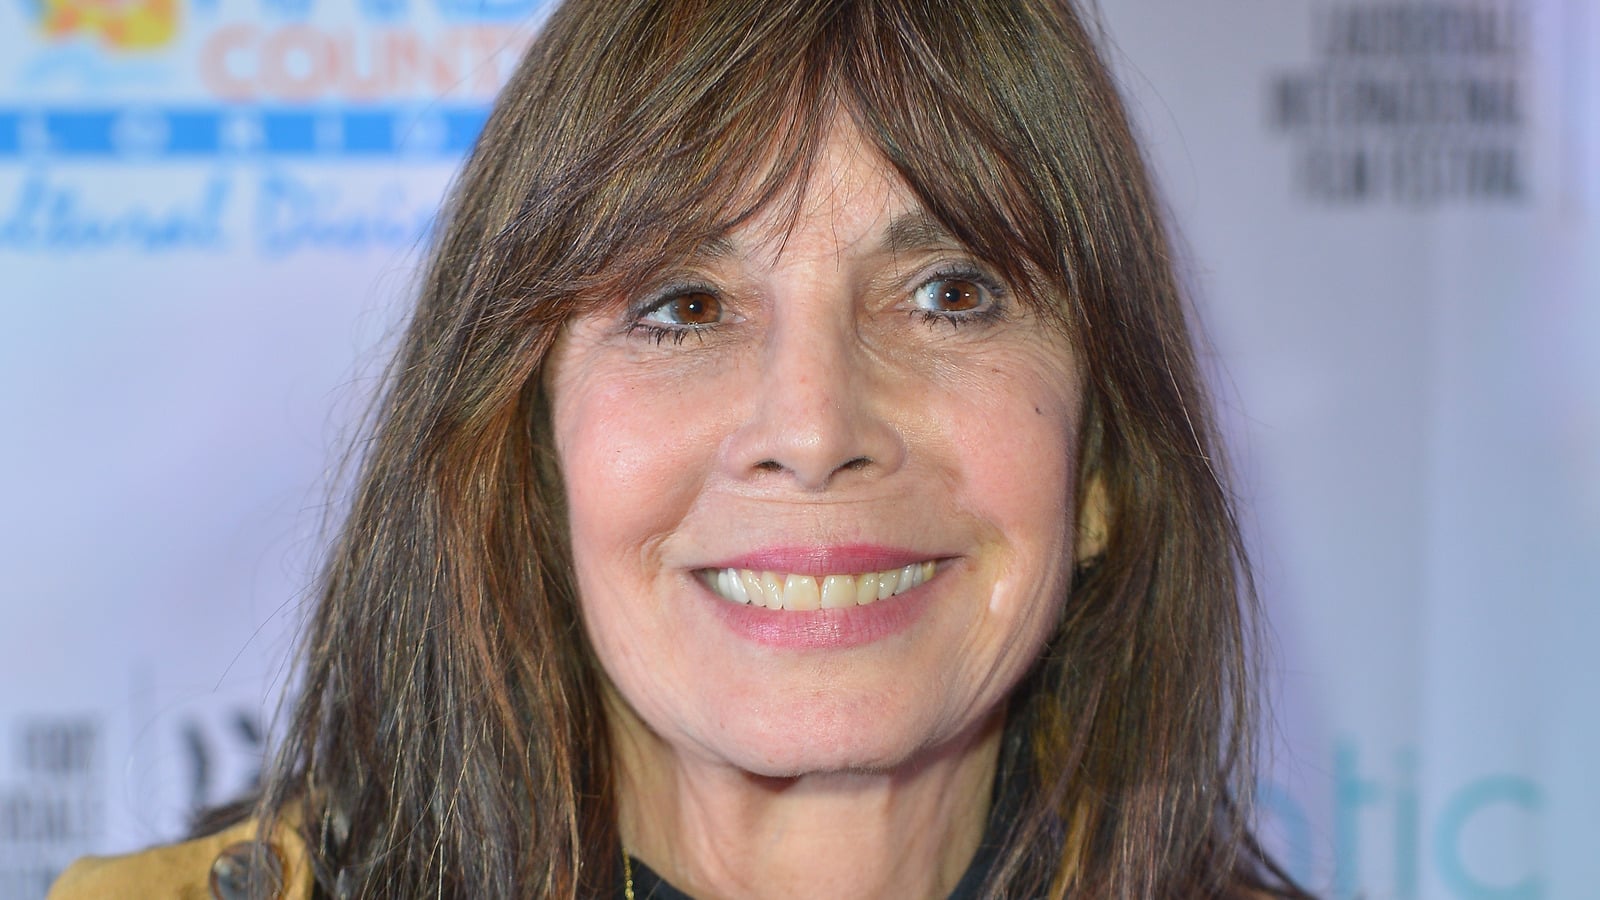 About Talia Shire from 